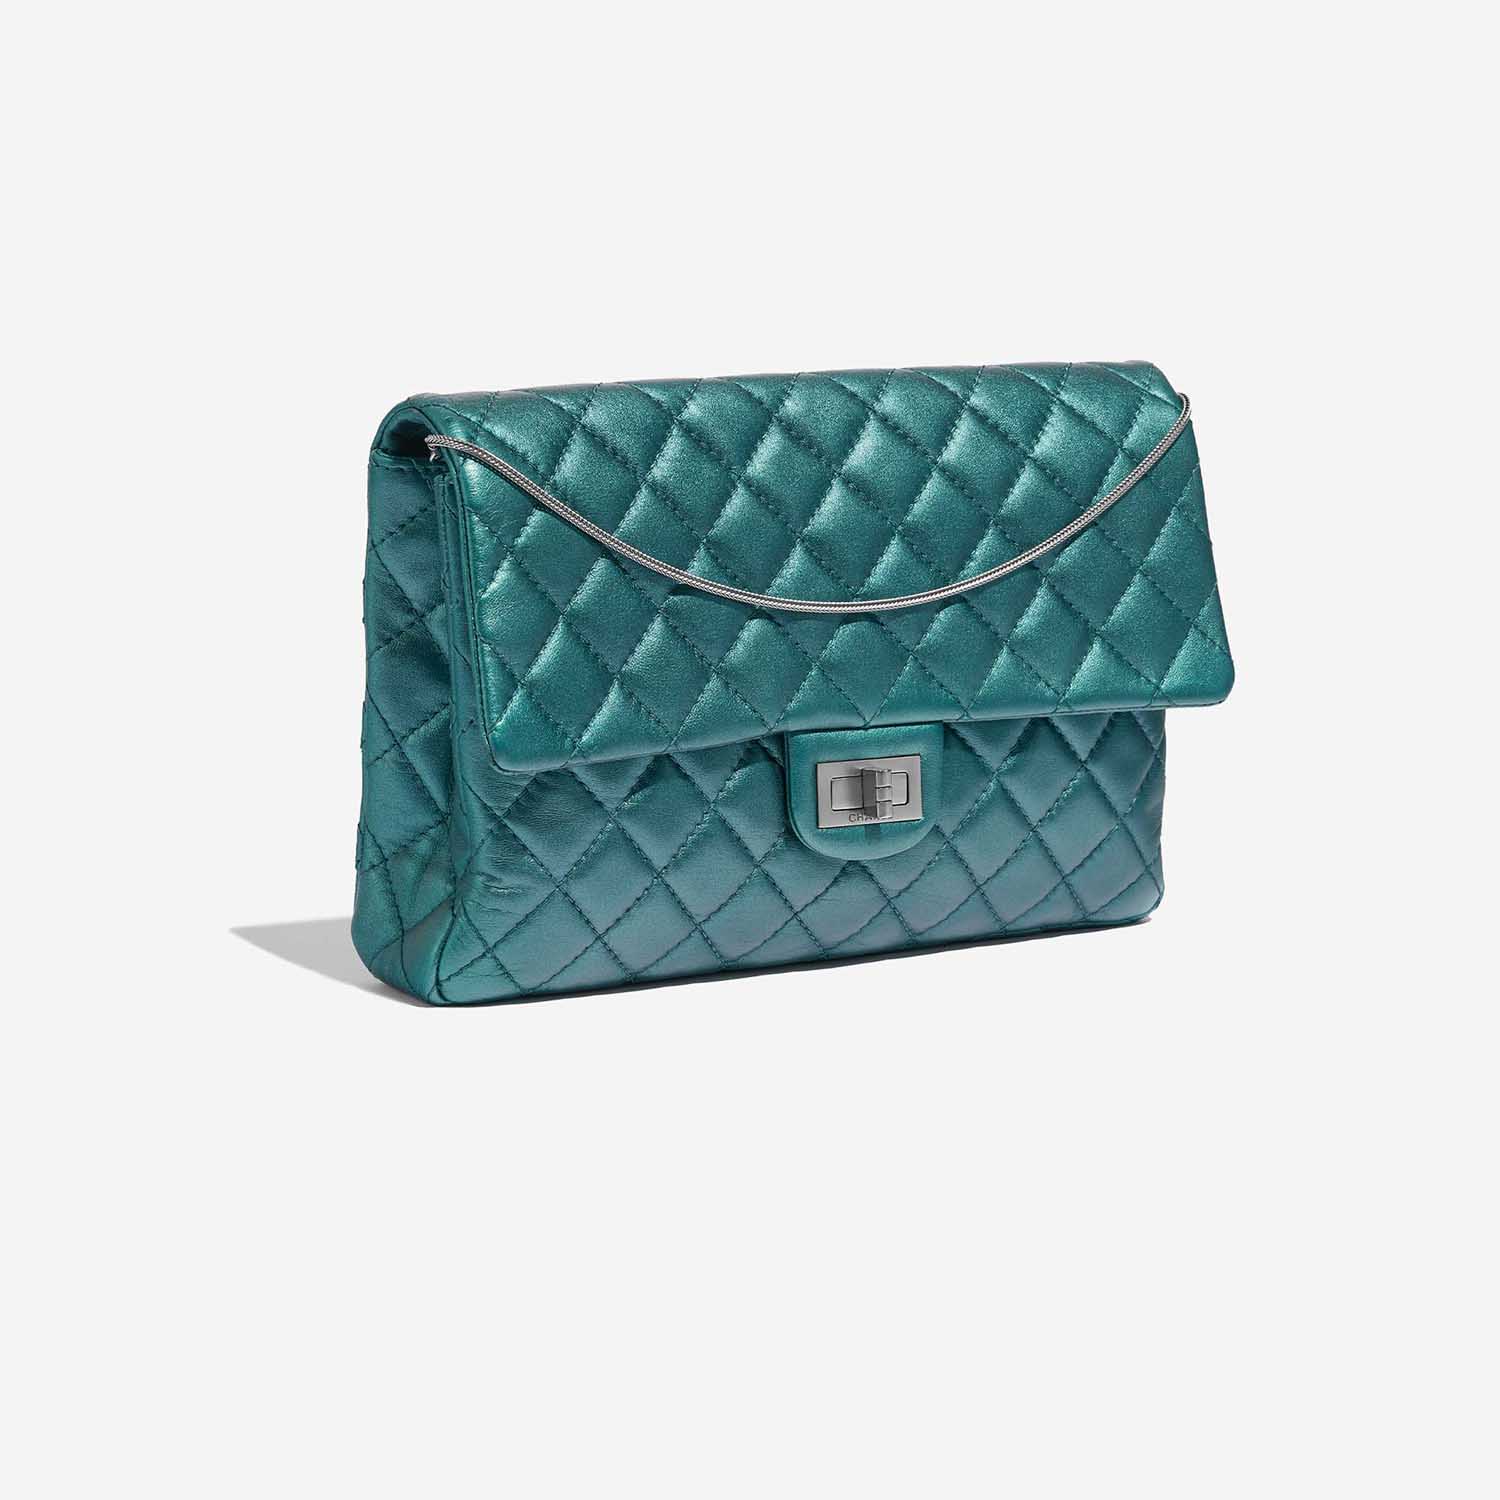 Pre-owned Chanel bag 2.55 Reissue 226 Lamb Metallic Blue Blue Side Front | Sell your designer bag on Saclab.com